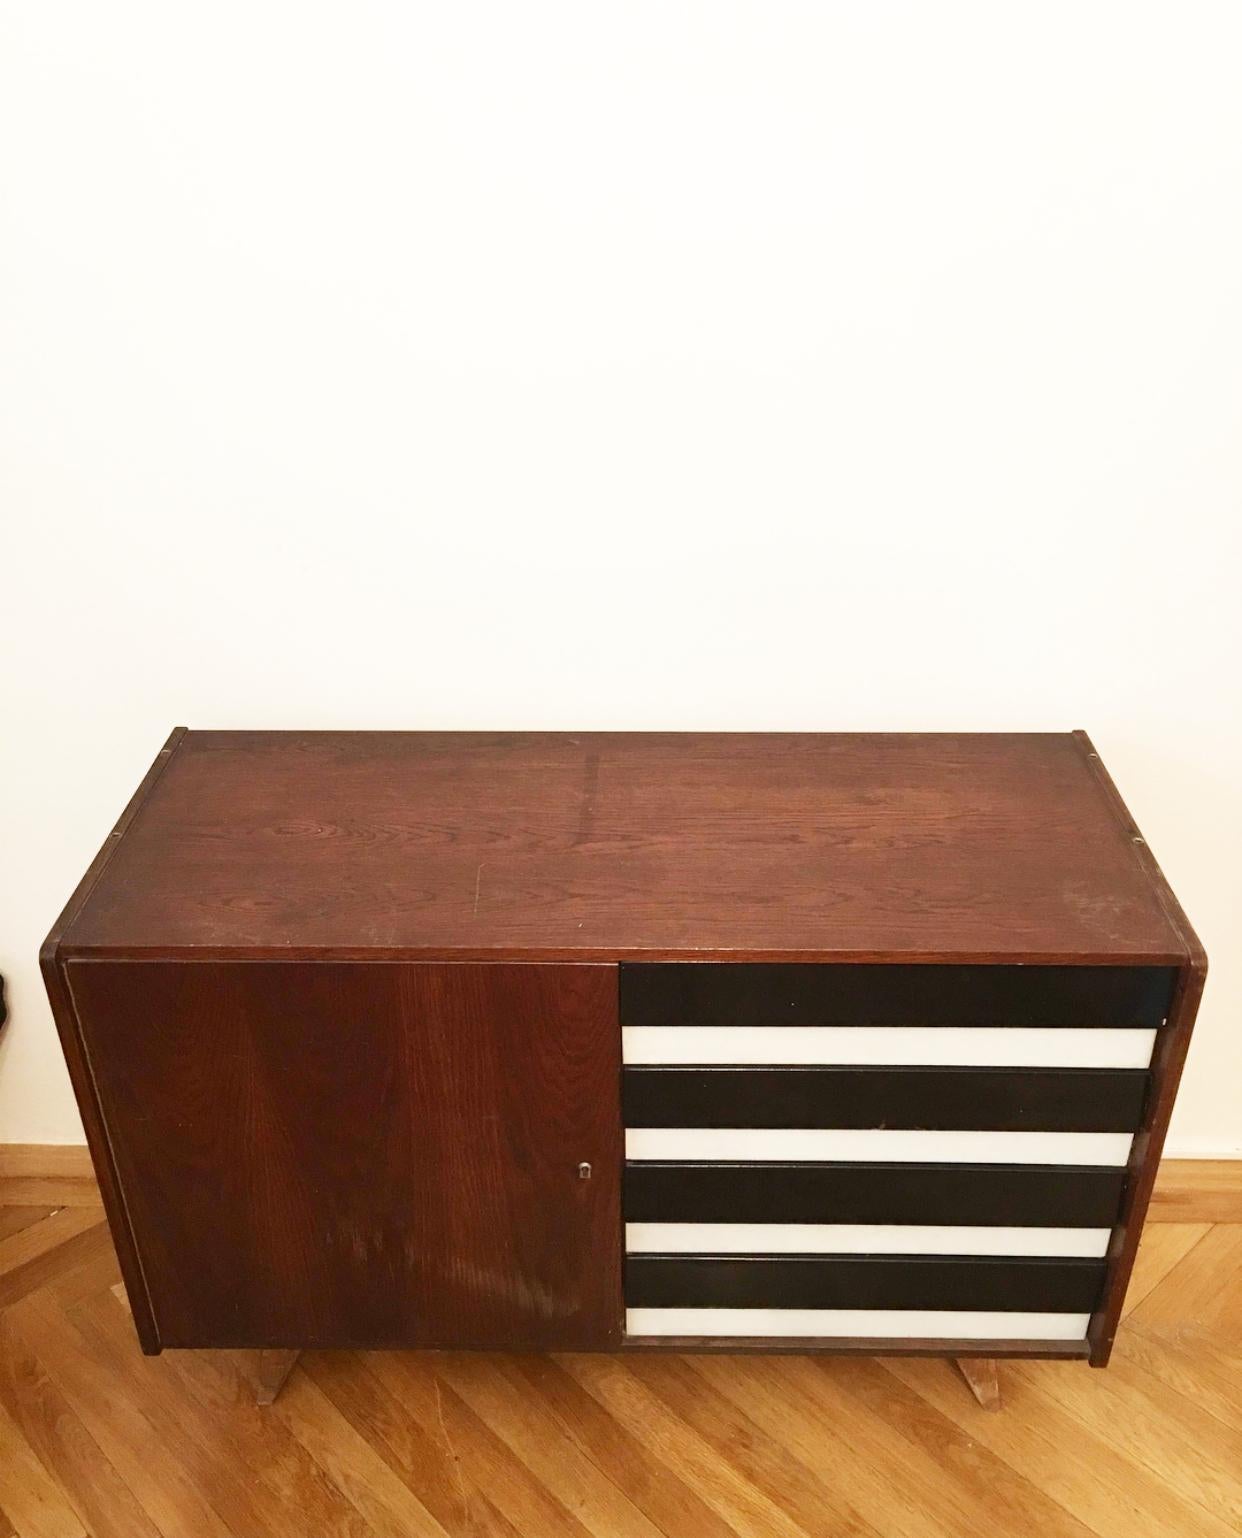 Original vintage chest of drawers with the drawers in black and white combination. Type U-458, manufactured in the 1960s by Interier Praha, designed by Jiri Jiroutek. Wooden construction, drawers are made of plastic, the coloured front part of the